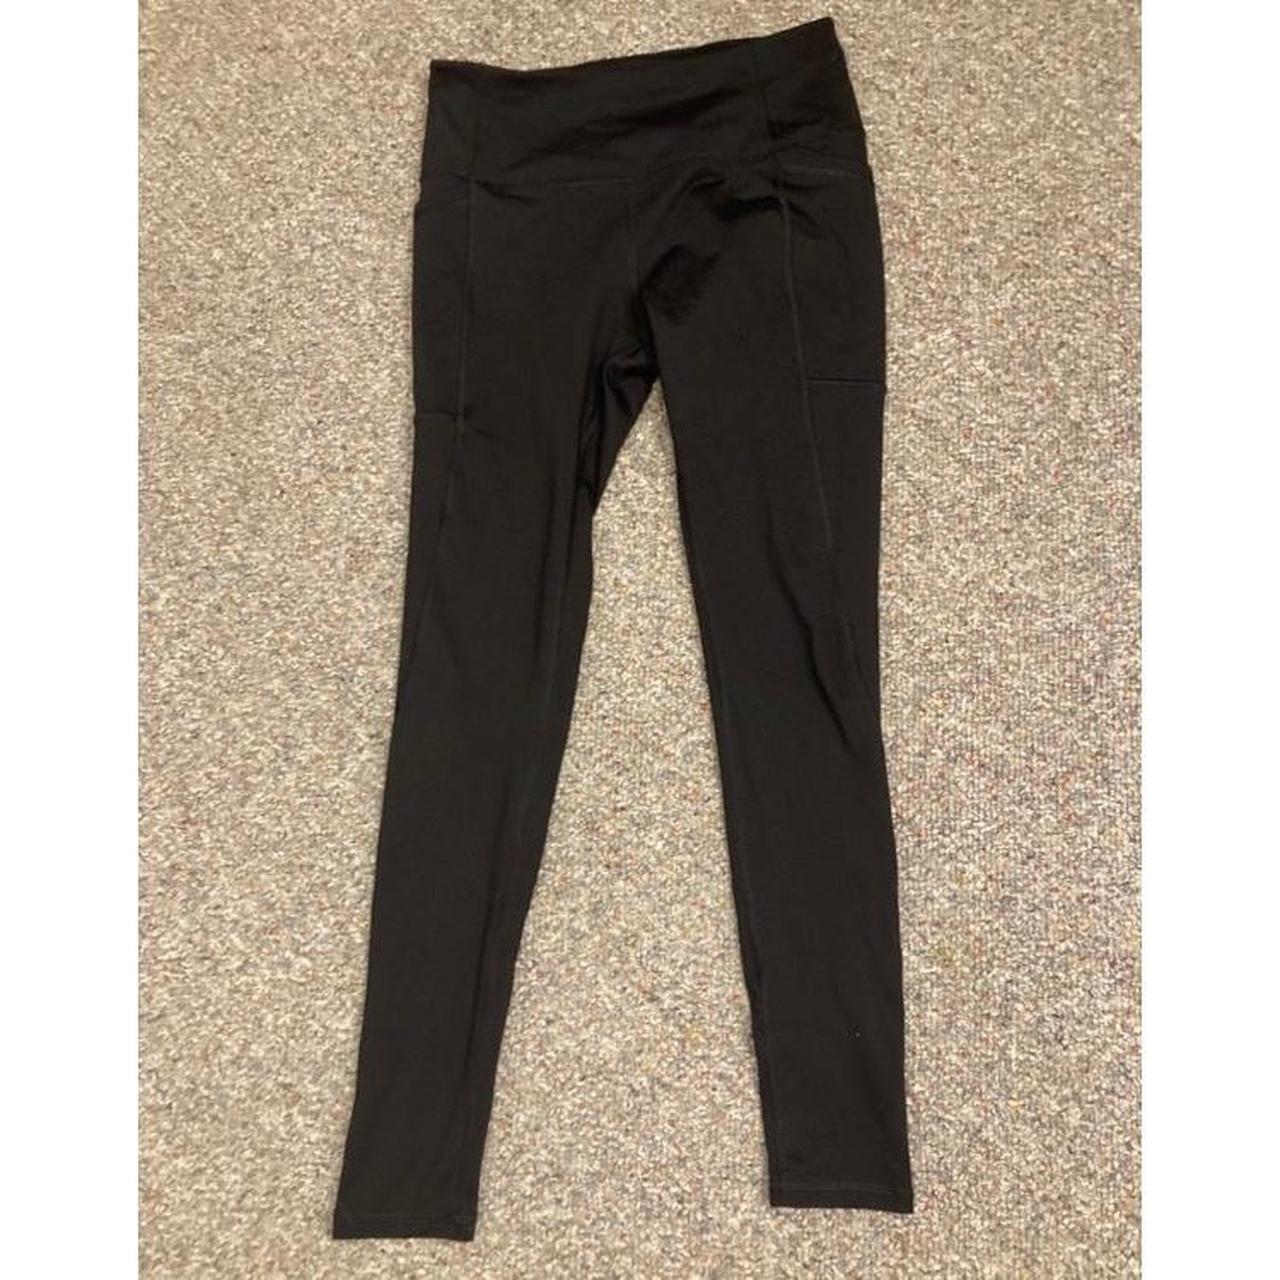 Size small black high-waisted DSG leggings They - Depop